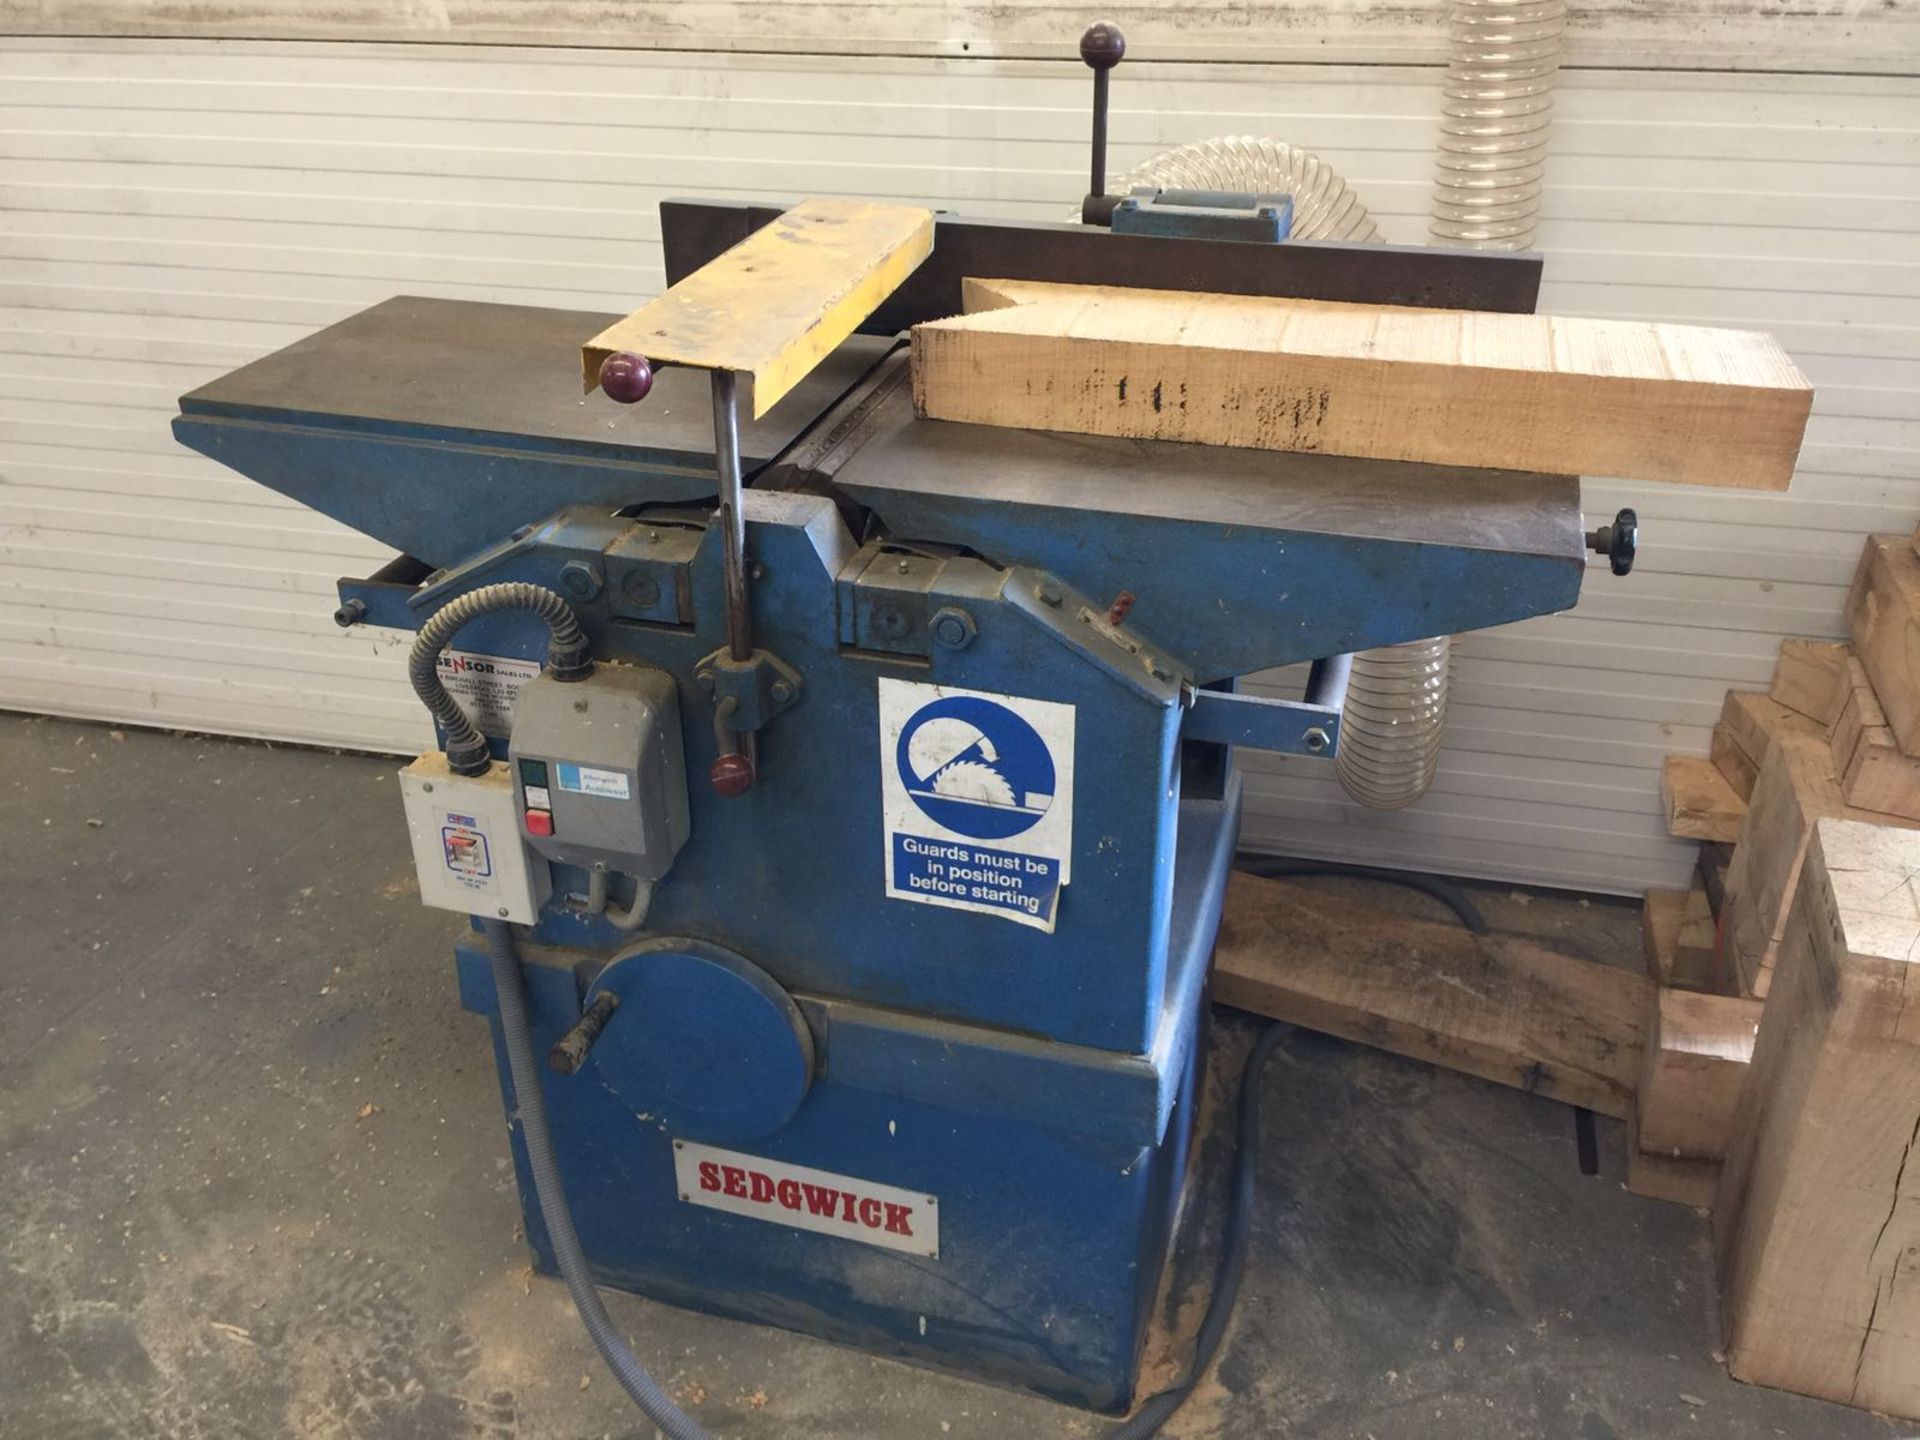 2005 SEDGWICK BENCH PLANER / THICKNESSER - IN WORKING ORDER 300mm